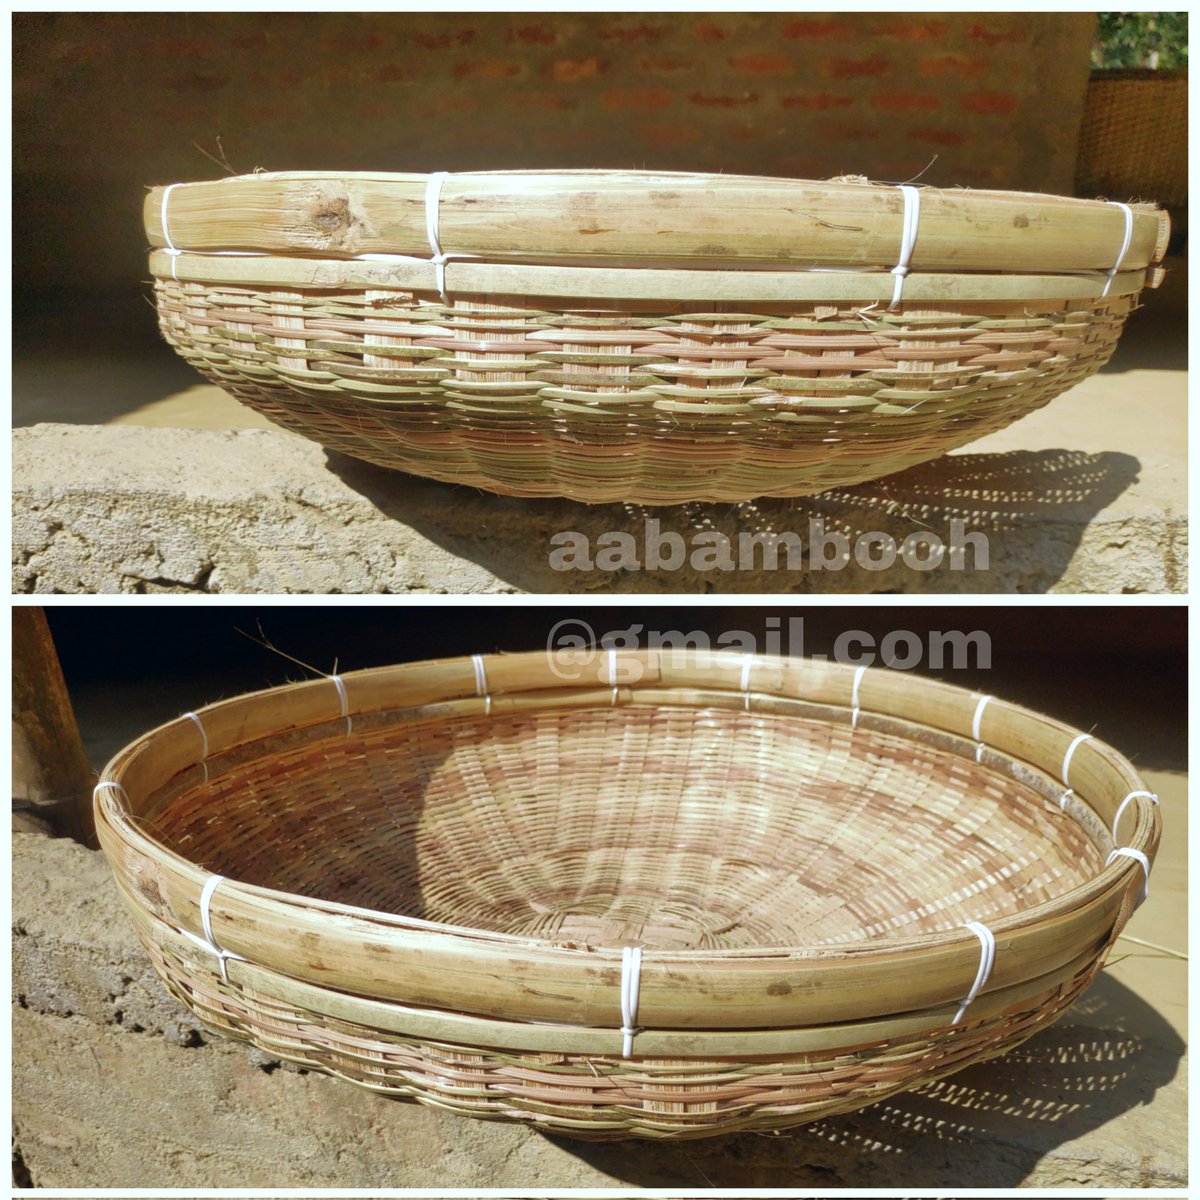 We #create #contemporary #uniqueproducts of #Bamboo that makes every day a little more #special #bamboobasket #amanartbamboohandicrafts #aabh #handmade #basket #ovalbasket #basketset #handmadebasket #homestorage #contemporaryproducts #ecofriendlyhome #homesolutions #storagebasket